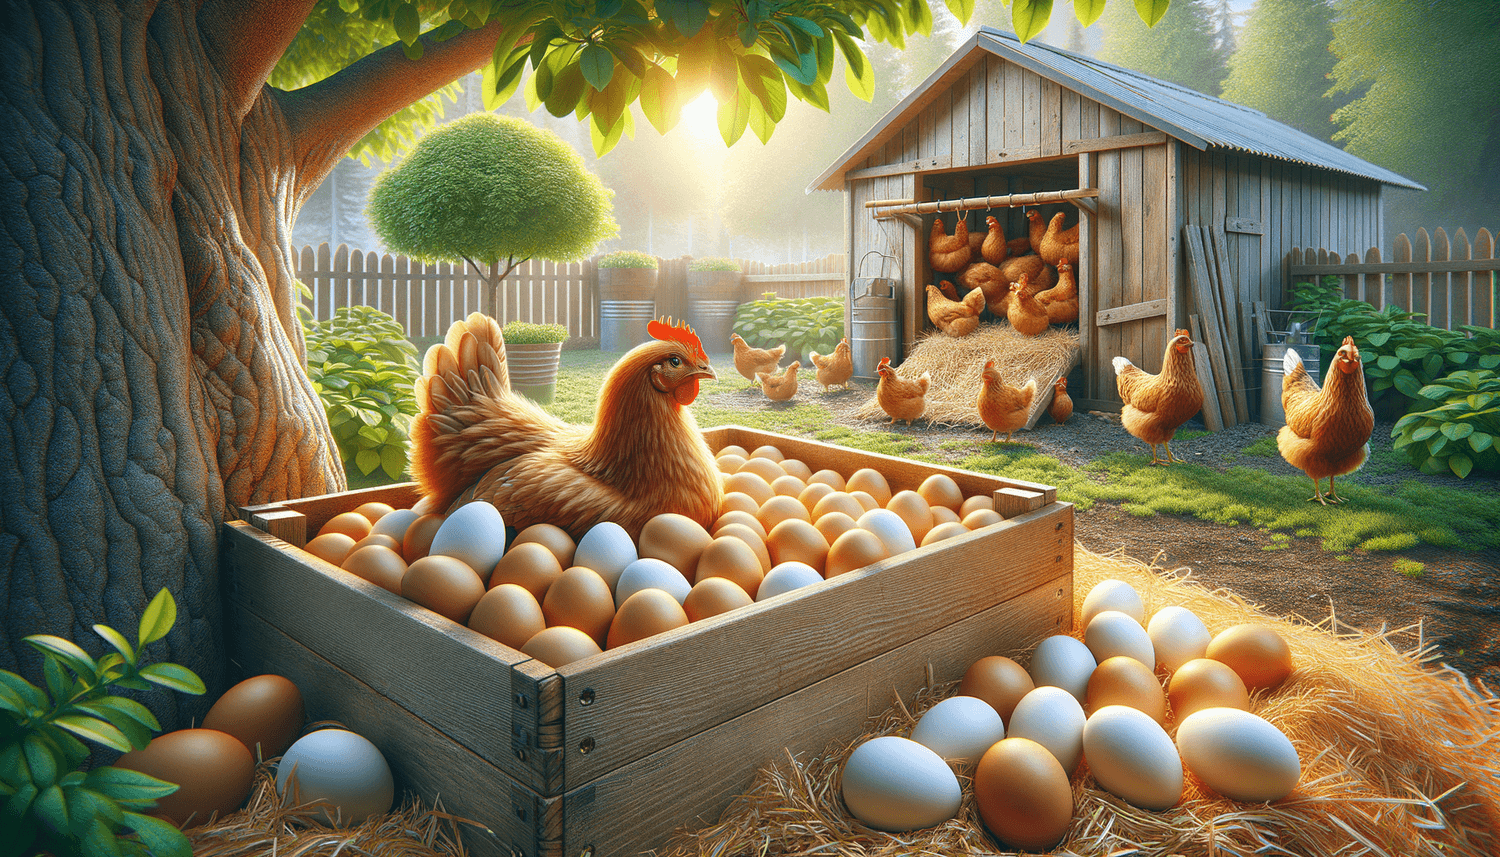 How Long Does It Take Chickens to Hatch?